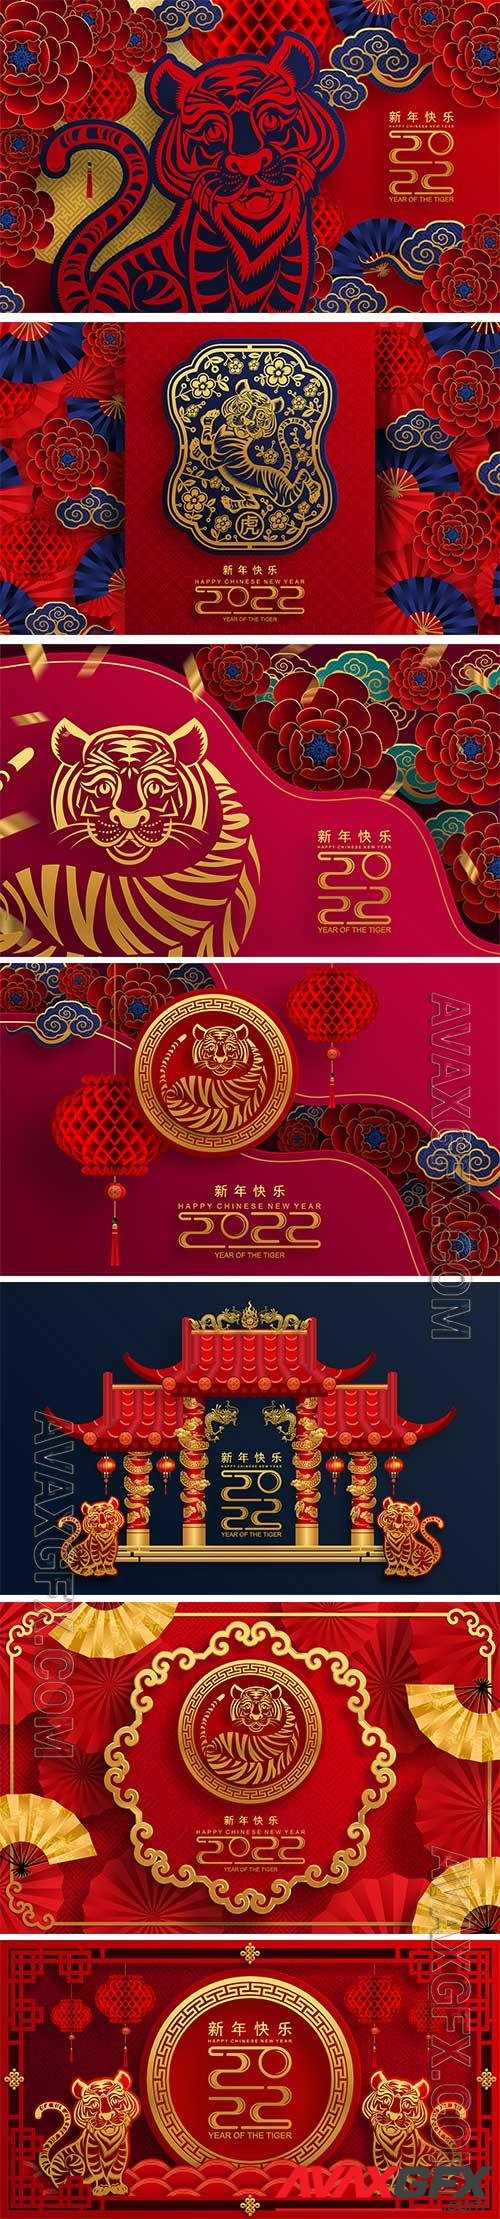 Chinese New Year, illustration with tiger, symbol of 2022, vector texts vol 2